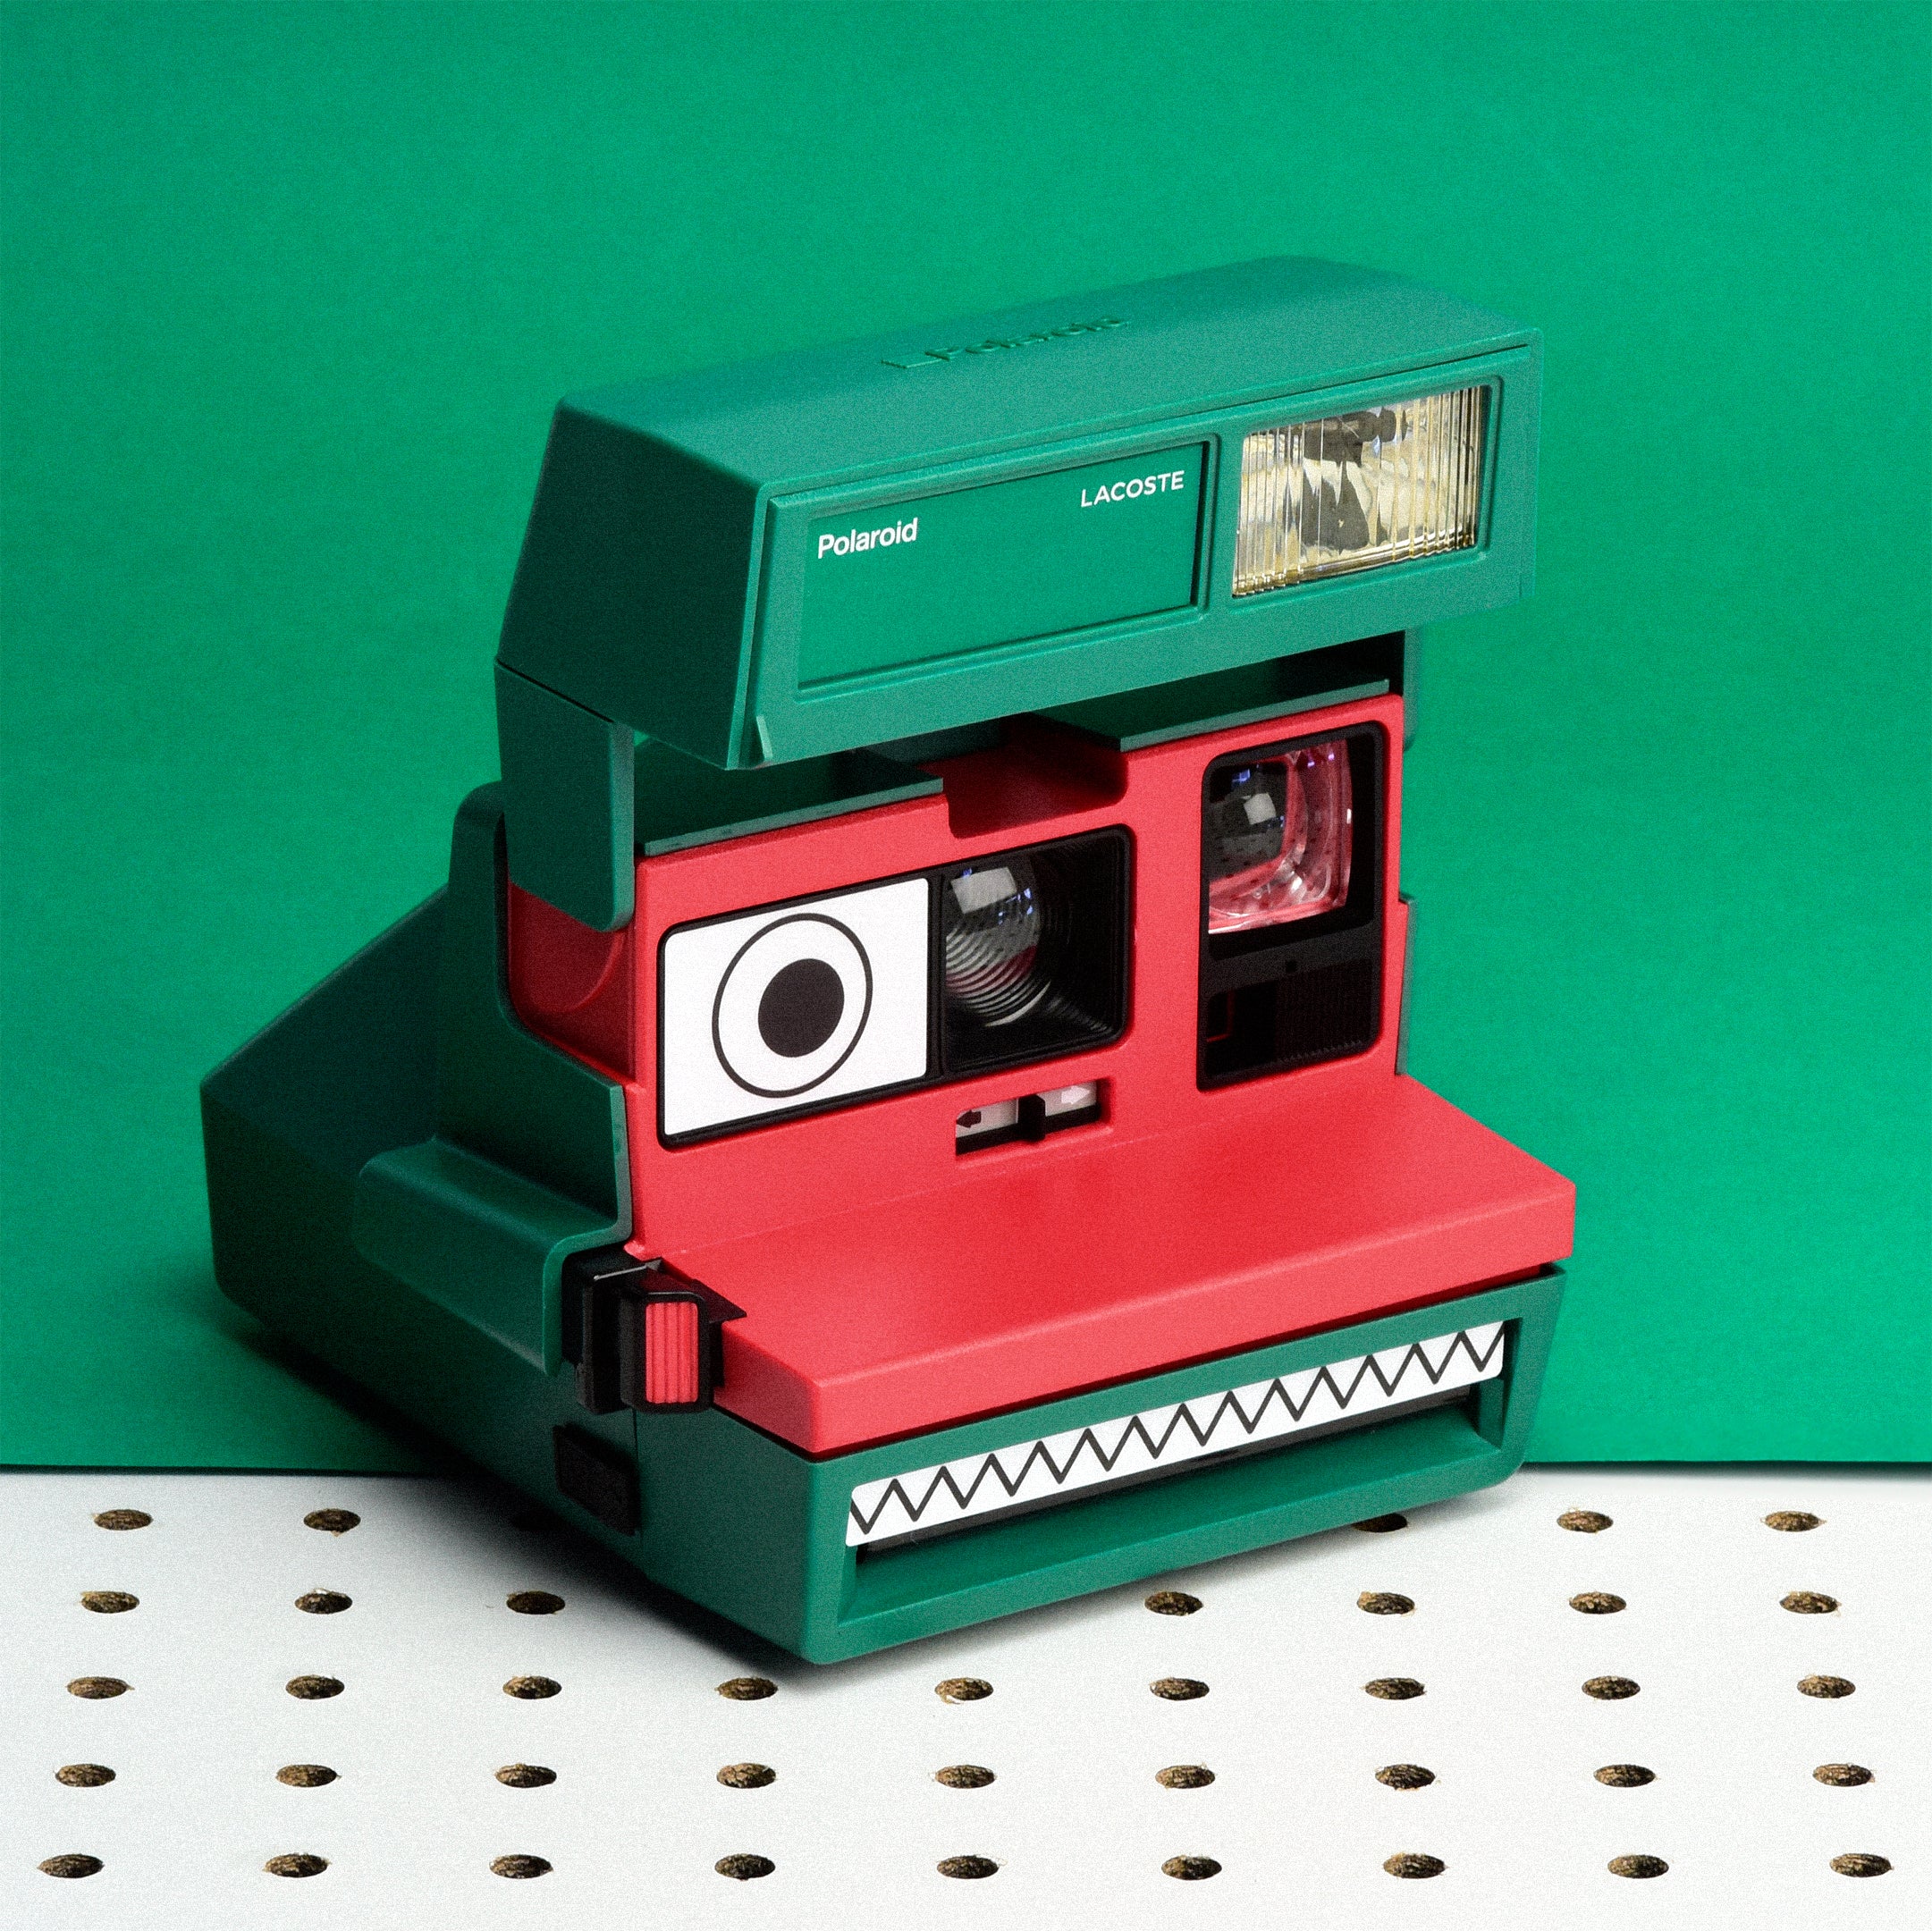 The Lacoste x Polaroid Collection